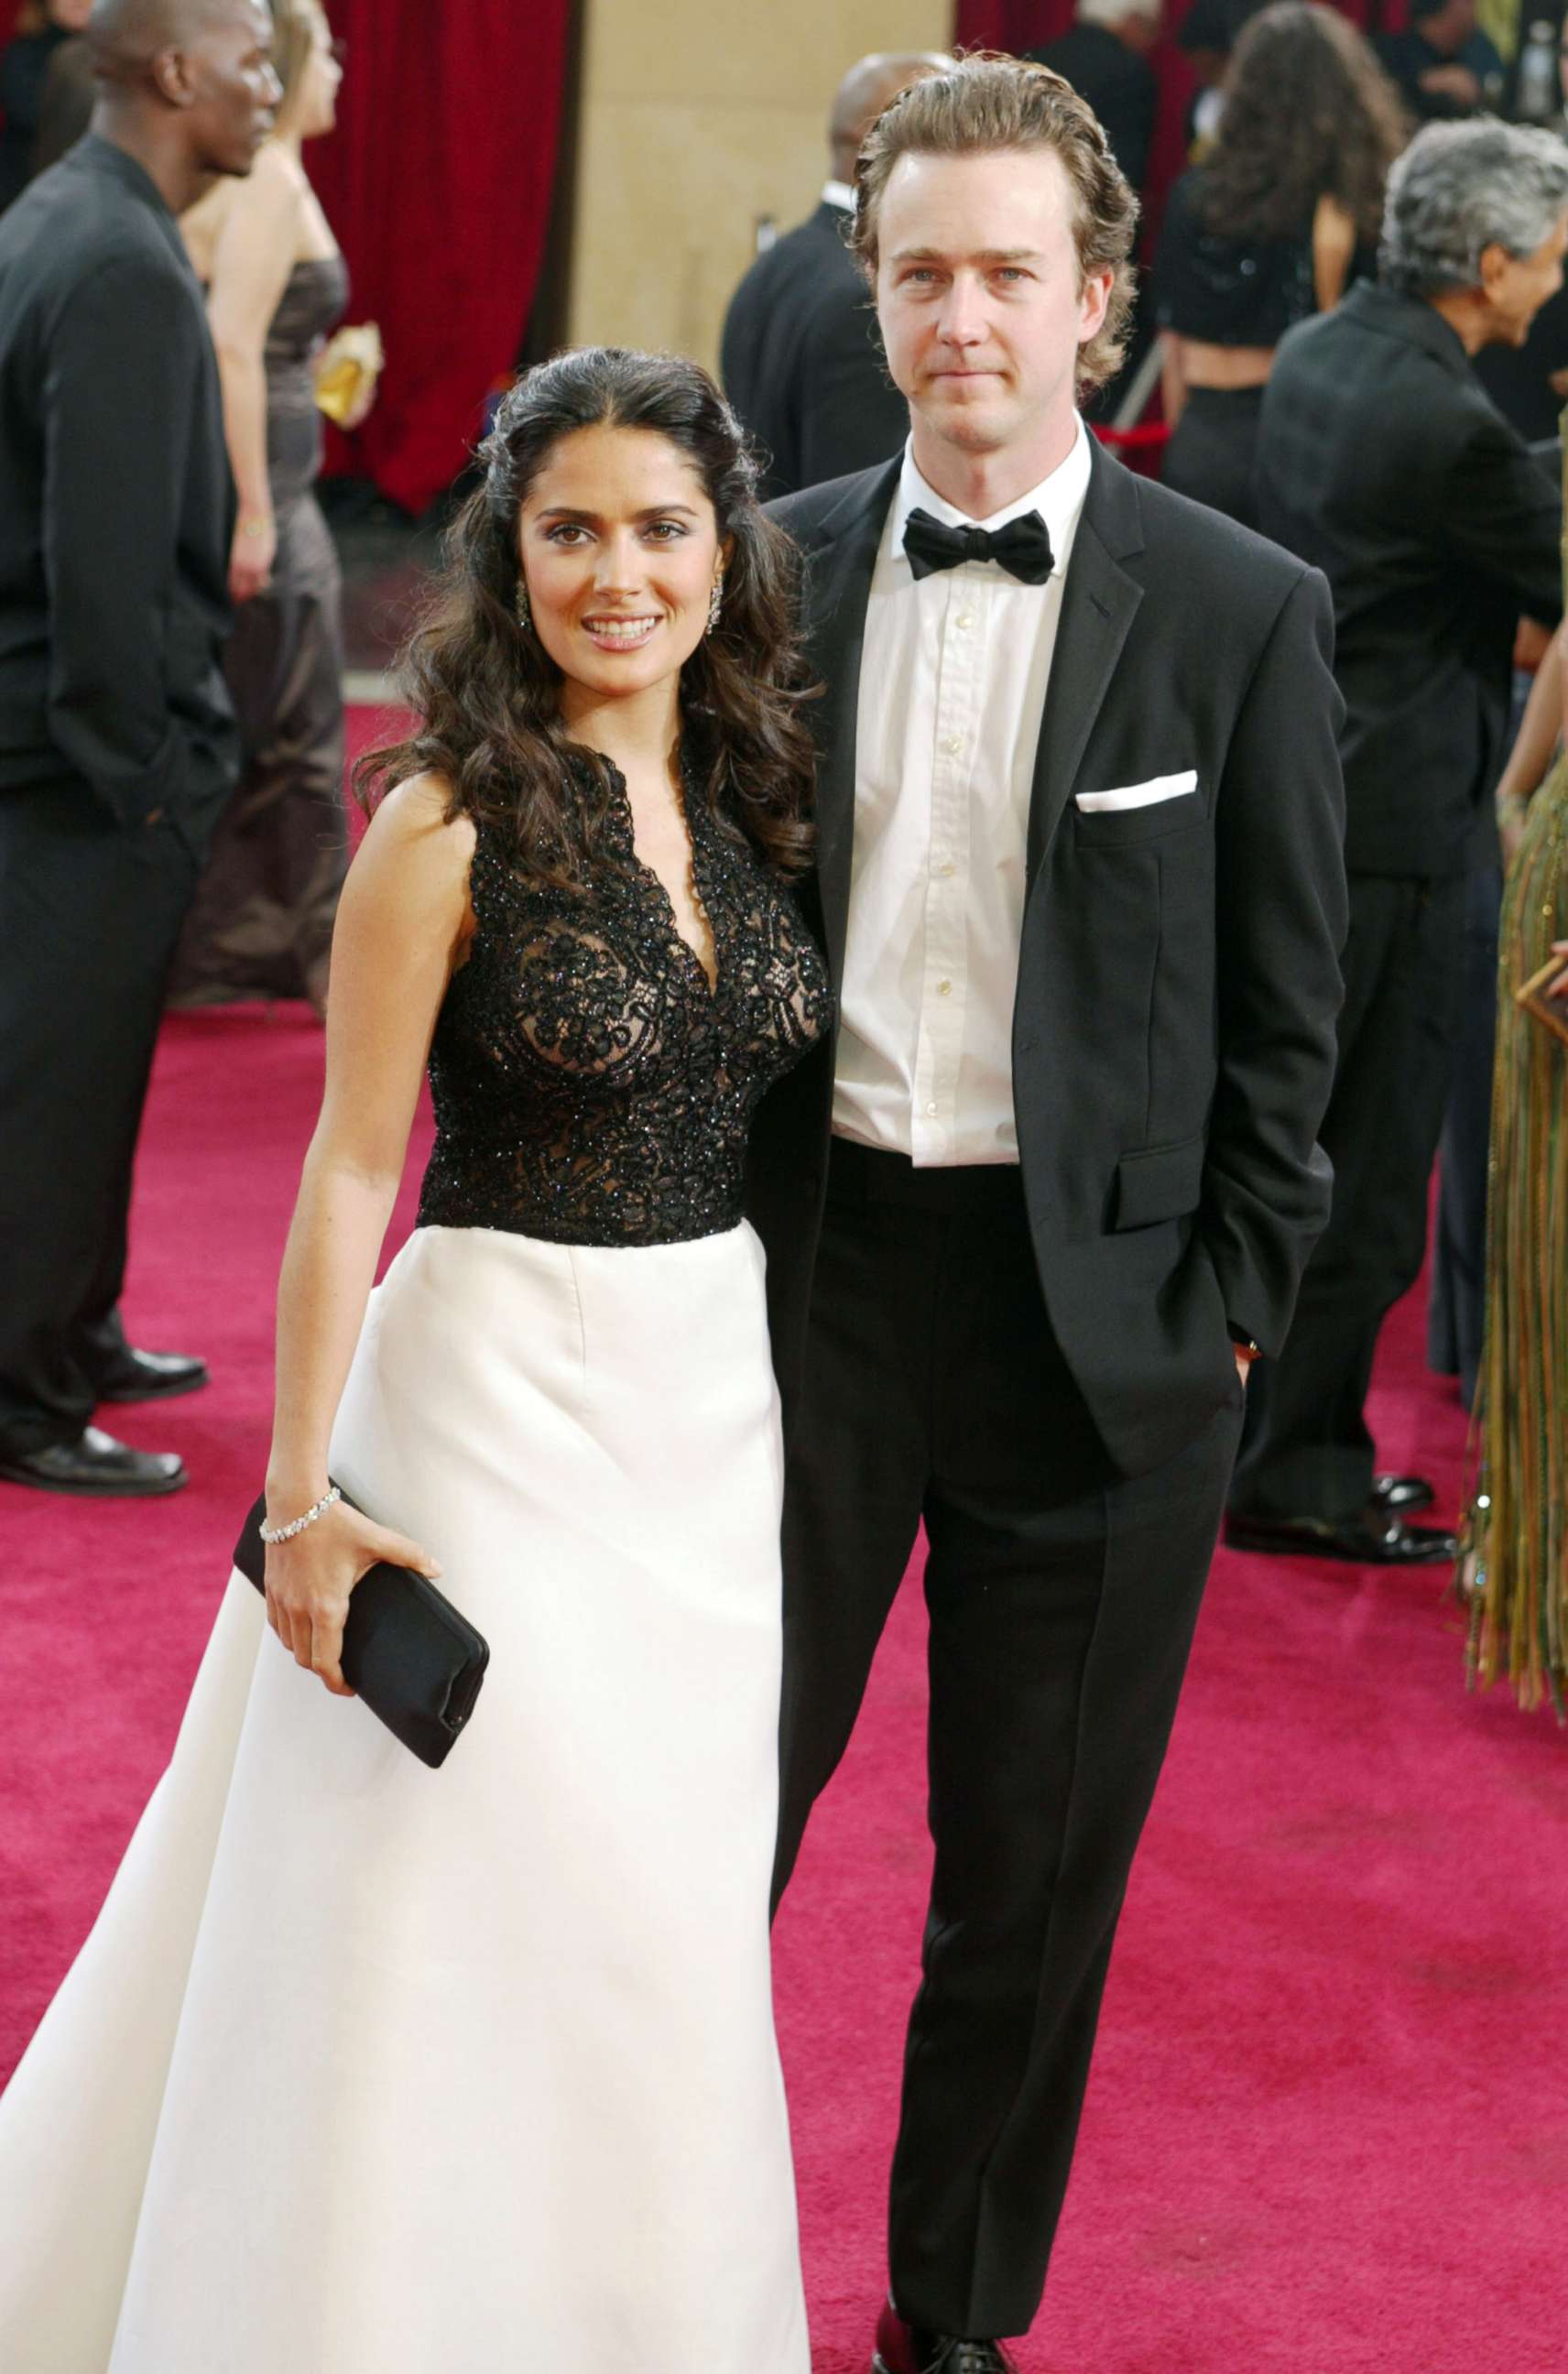 PHOTO: Salma Hayek and Ed Norton attend the 75th Annual Academy Awards at the Kodak Theater on March 23, 2003, in Hollywood, Calif.